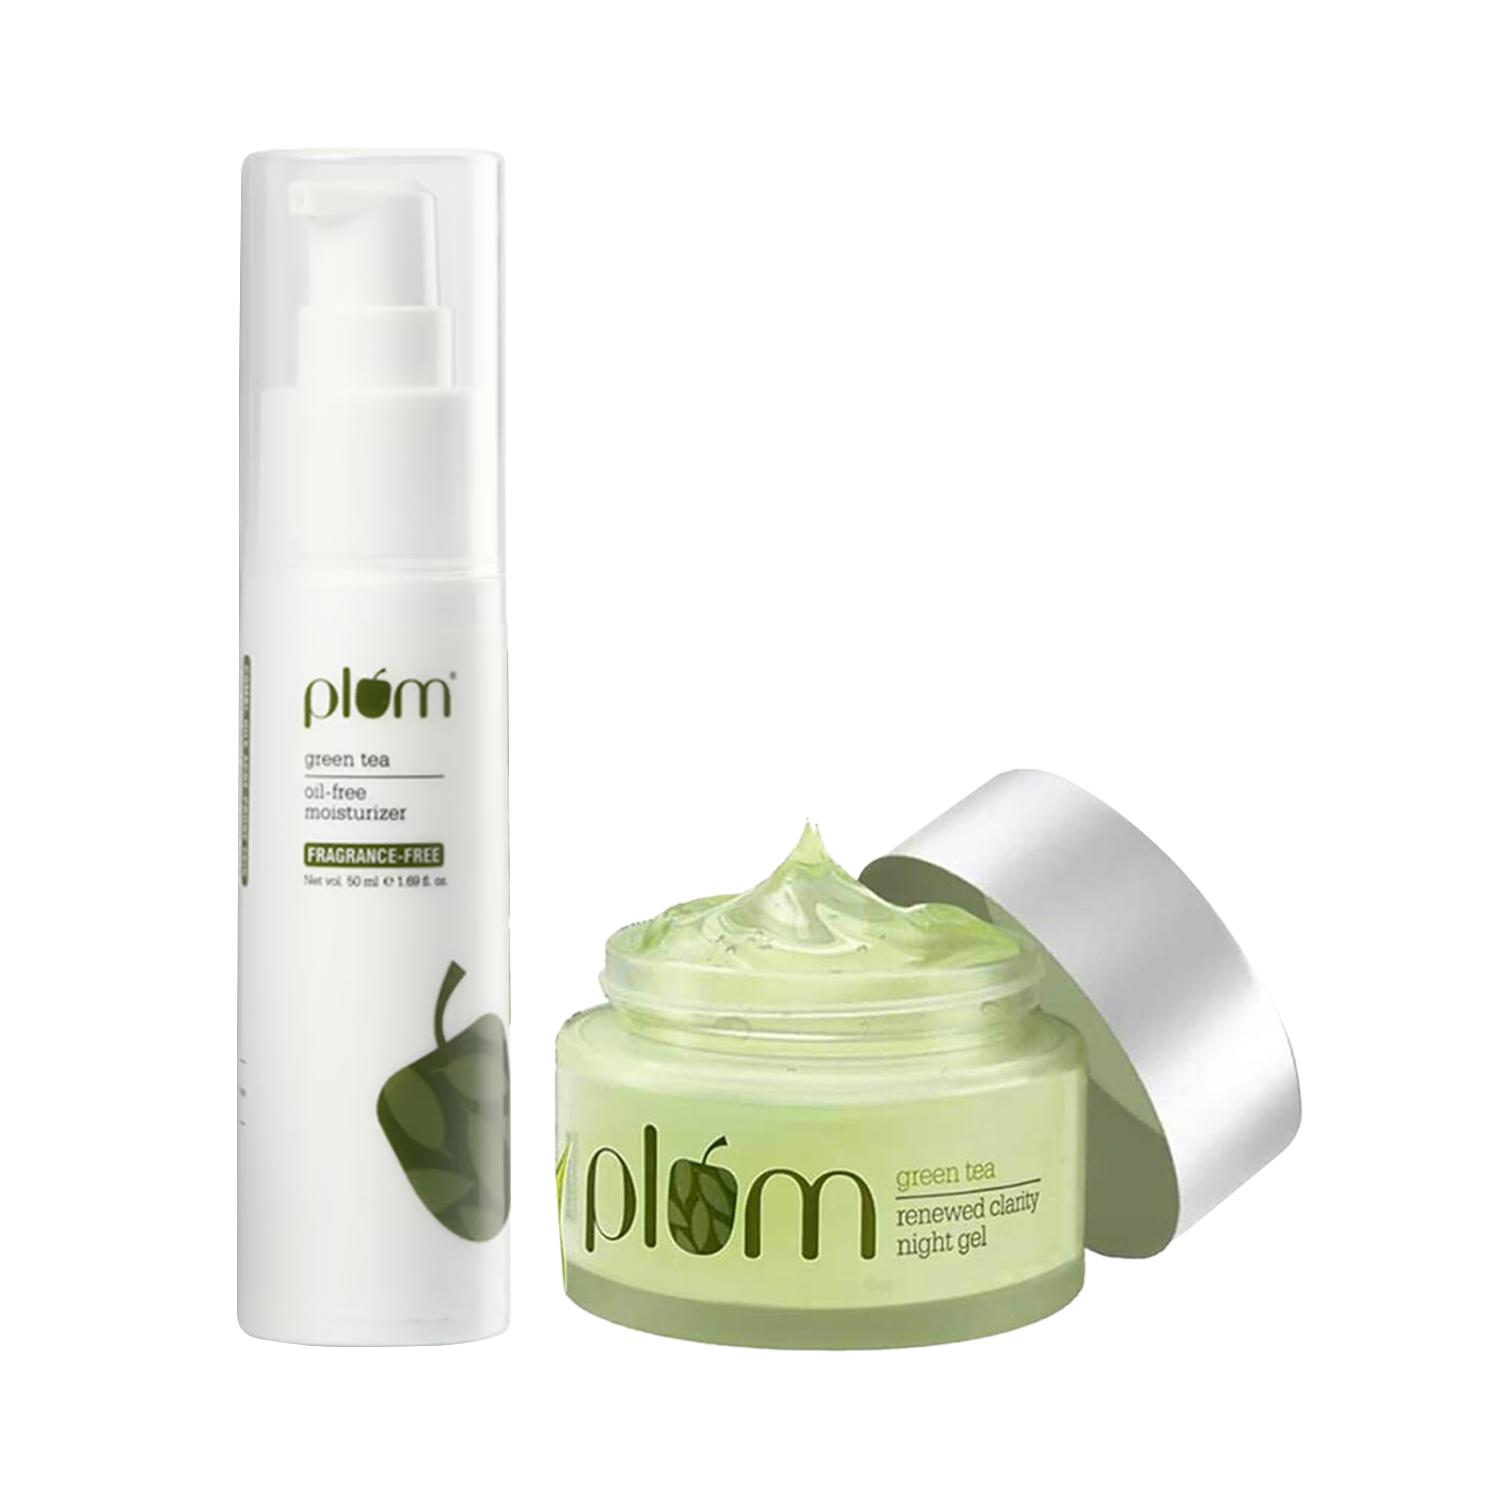 Plum | Plum Green Tea - Day & Night Oil-free Moisturizer Duo For All-day Hydration Combo